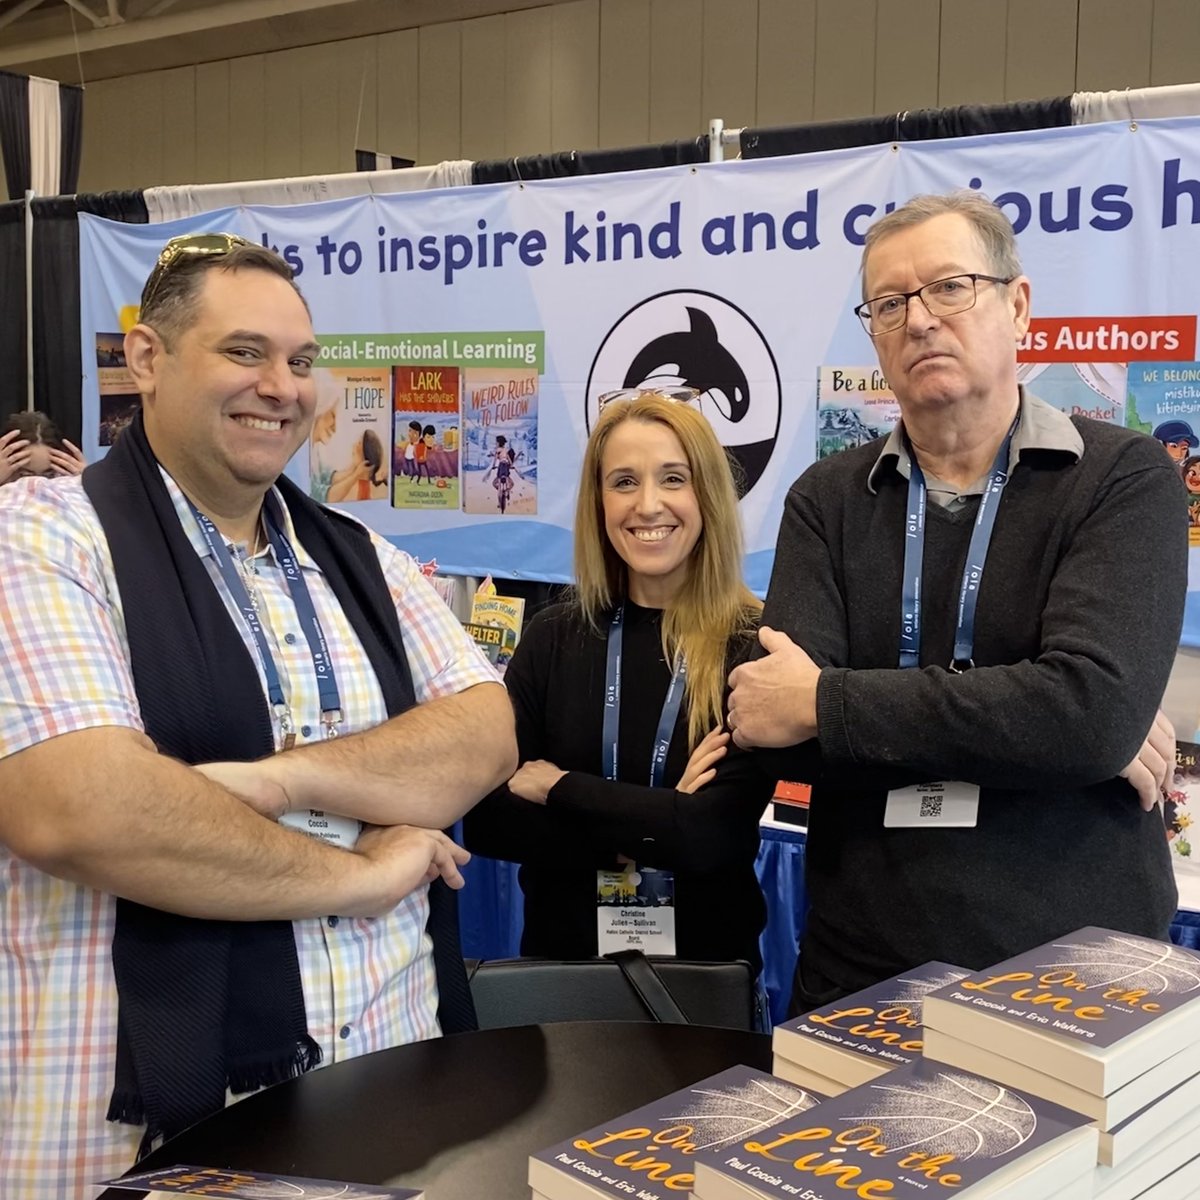 We tried… but @pauljcoccia and I couldn’t quite nail the gangster pose with @EricRWalters this morning @orcabook @ola #OLASC! #StGregoryReads @StGregoryHCDSB @HCDSB